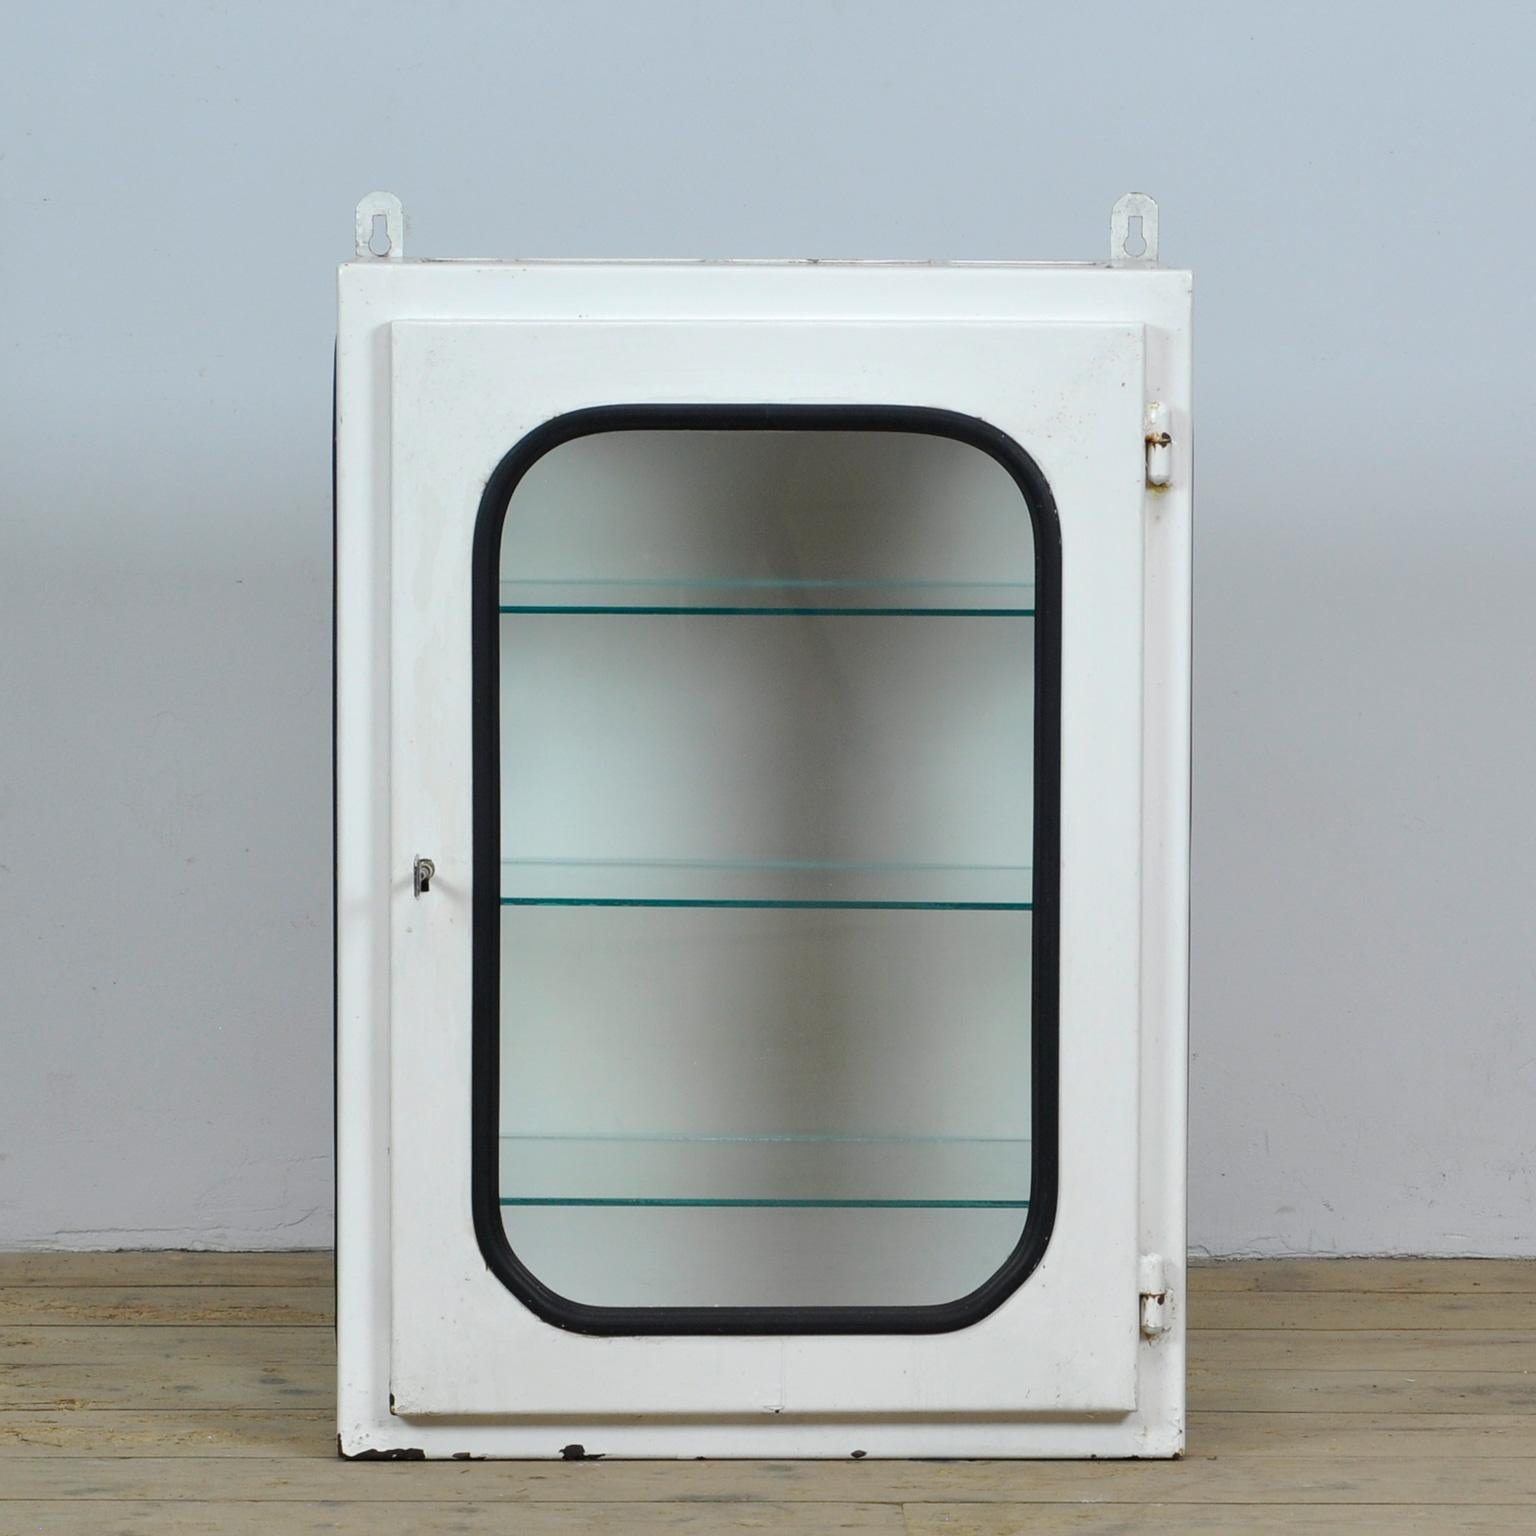 This medical cabinet (wall unit) was designed in the 1970s and produced circa 1975 in hungary. It was used in a hospital in budapest. It is made of iron and glass. The glass is held by a black rubber strip. The cabinet comes with three adjustable